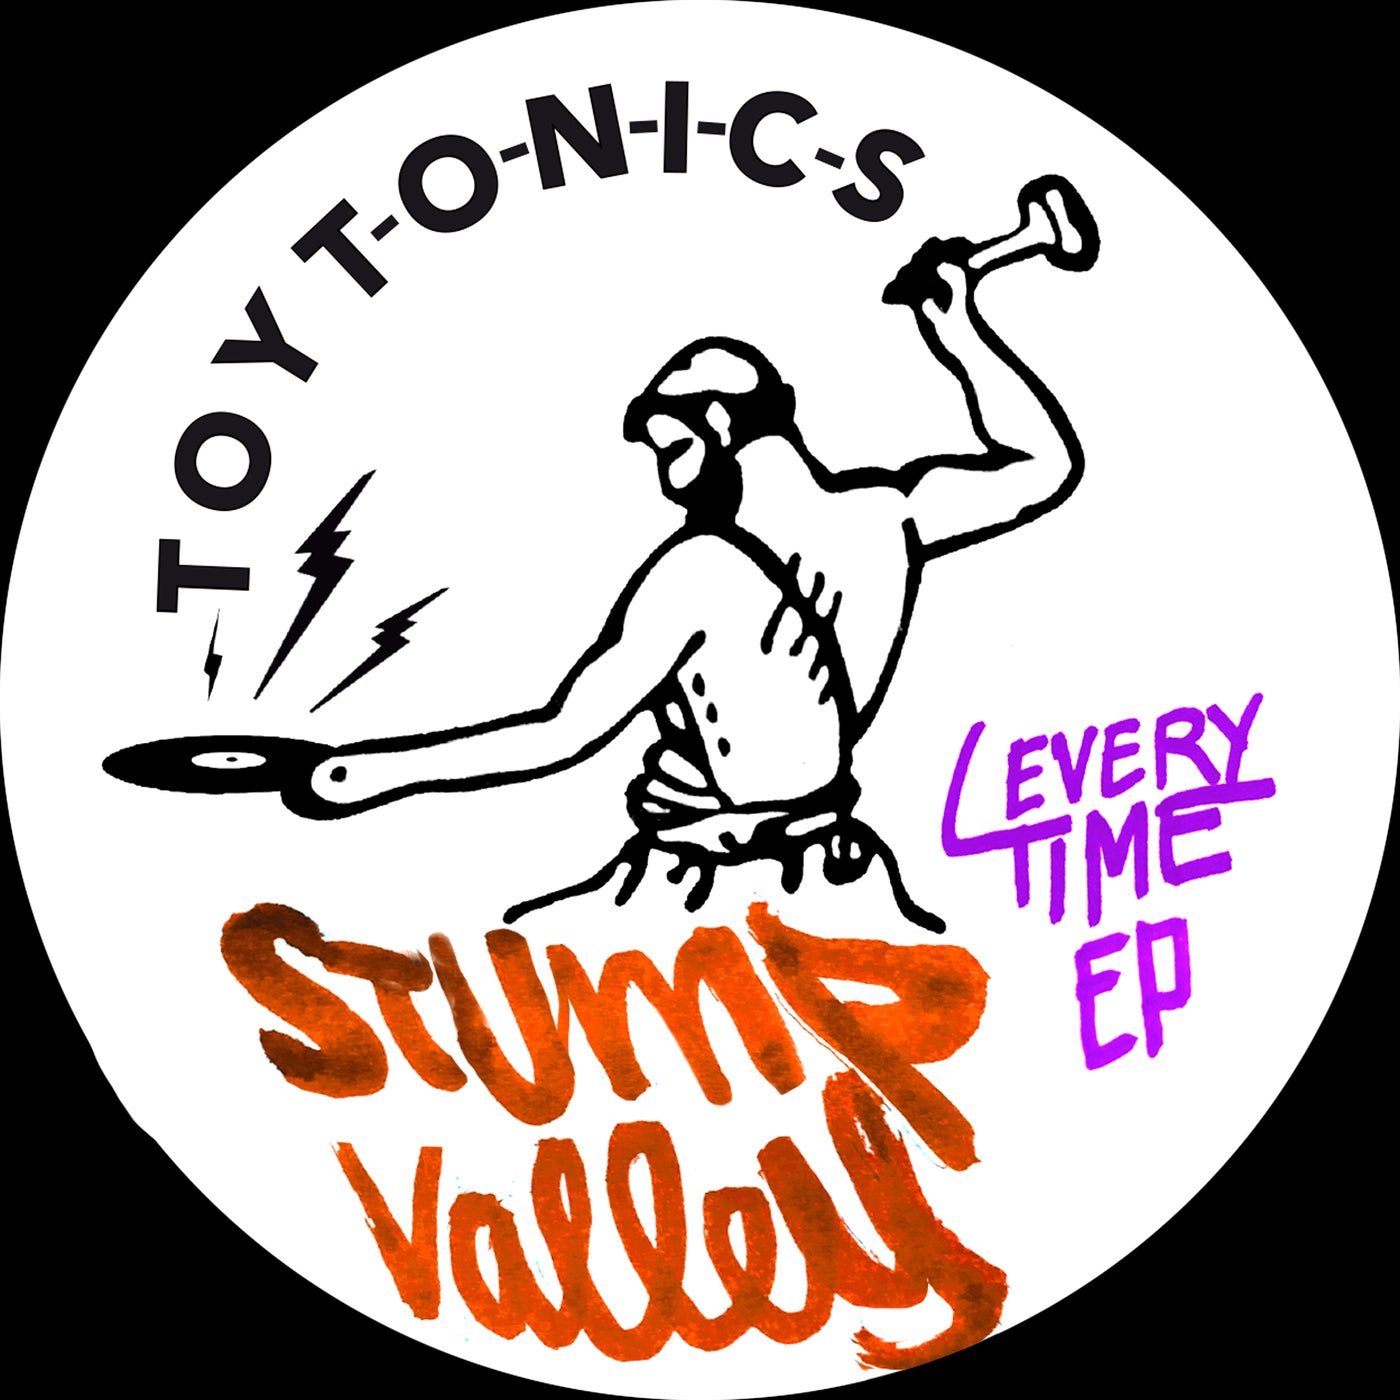 image cover: Stump Valley, Ready In LED & lRenee - Everytime on Toy Tonics